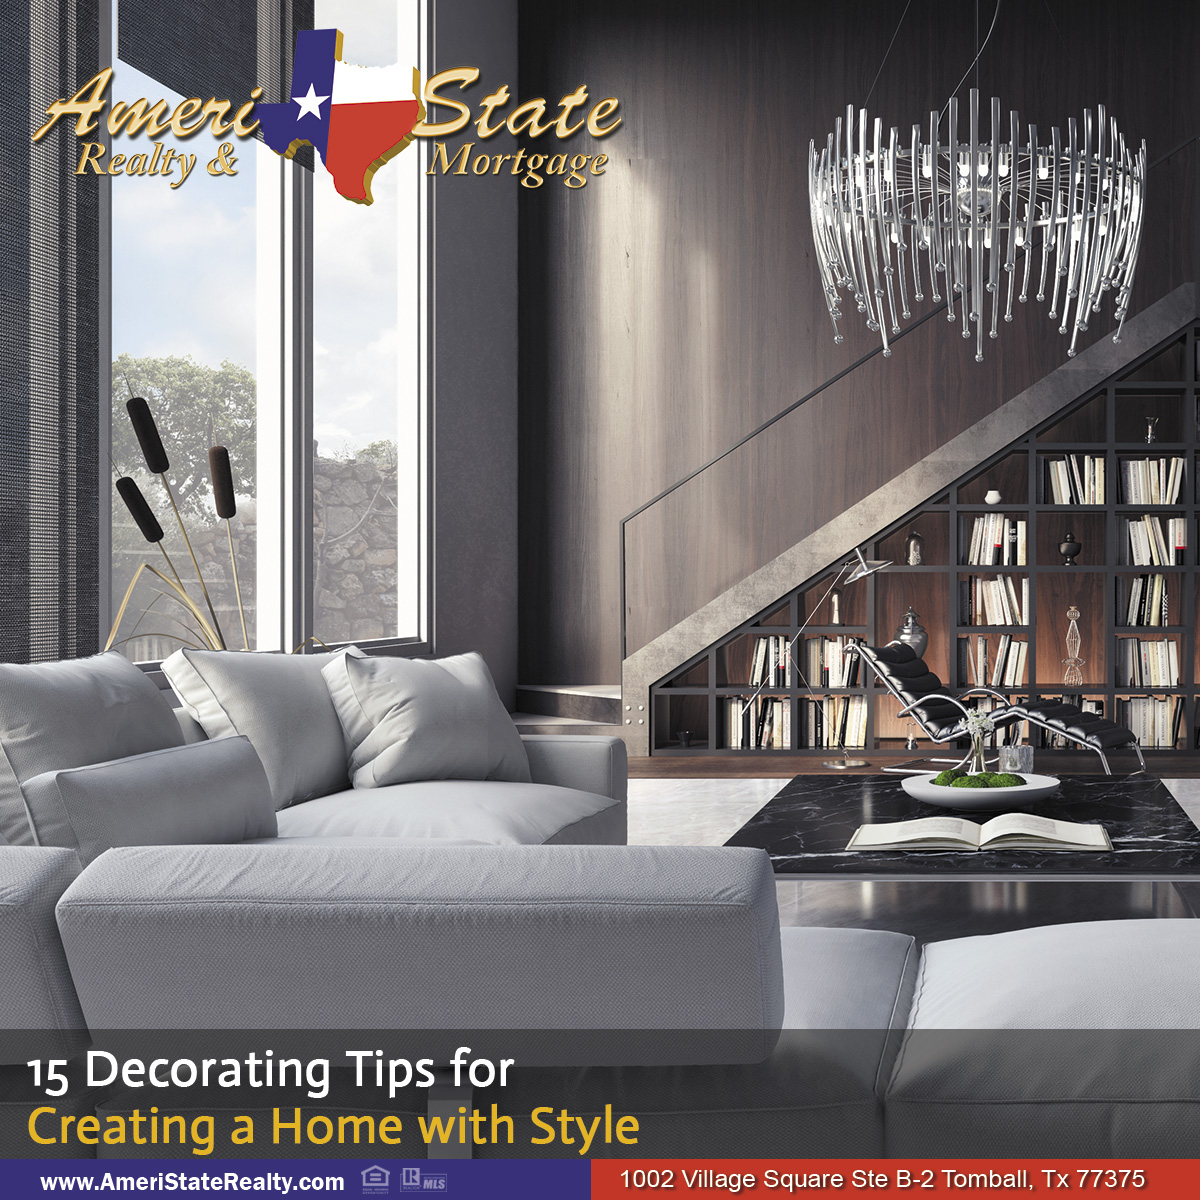 21 15 Decorating Tips for Creating a Home with Style